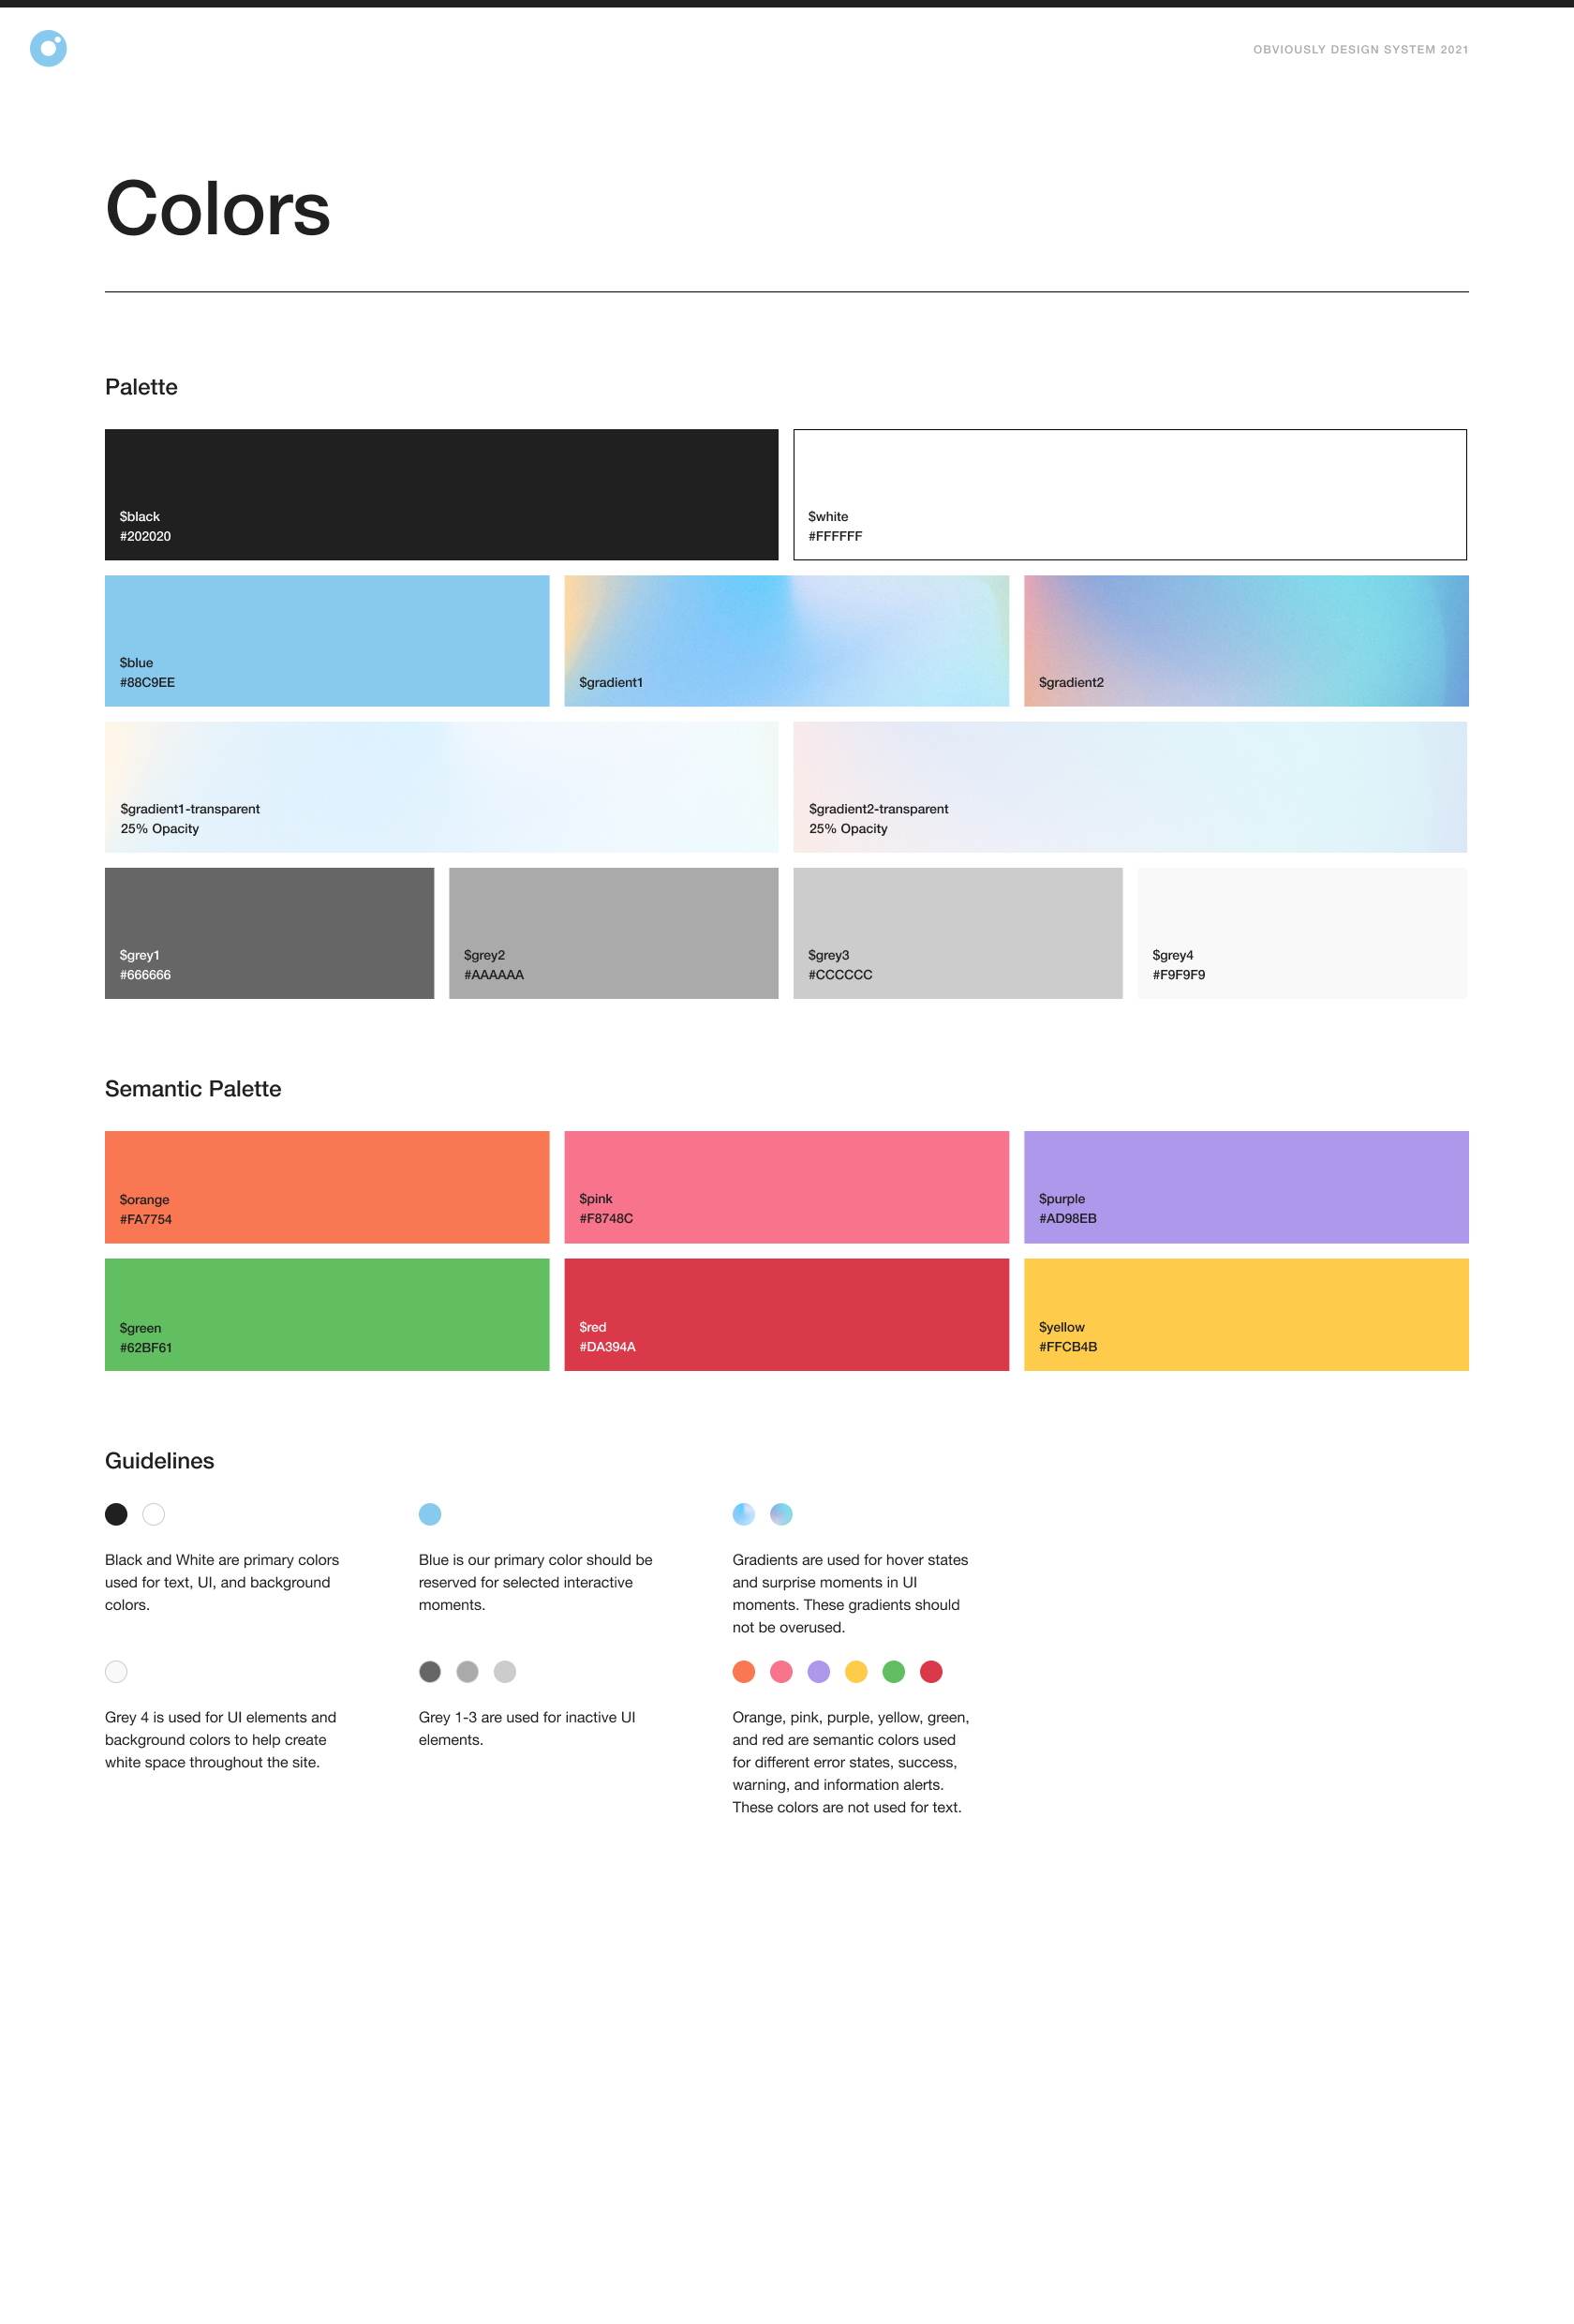 styleguide of colors